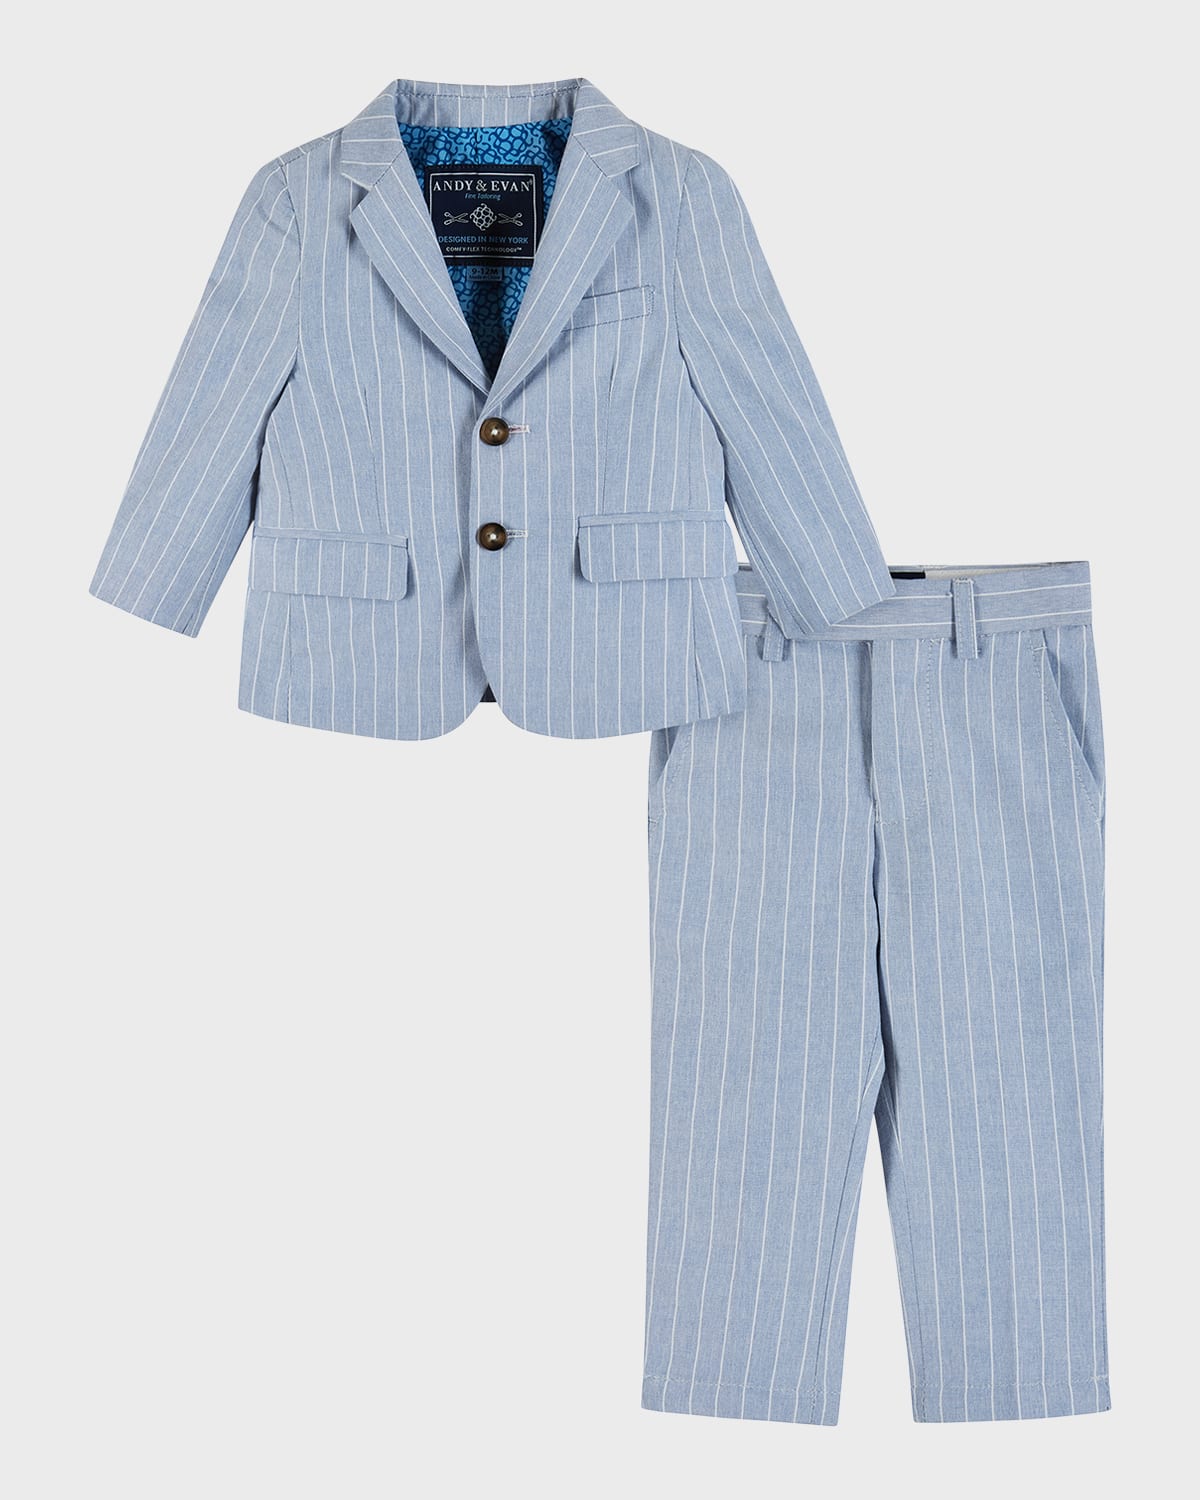 Andy & Evan Kids' Boy's Two-piece Suit Set In Blue